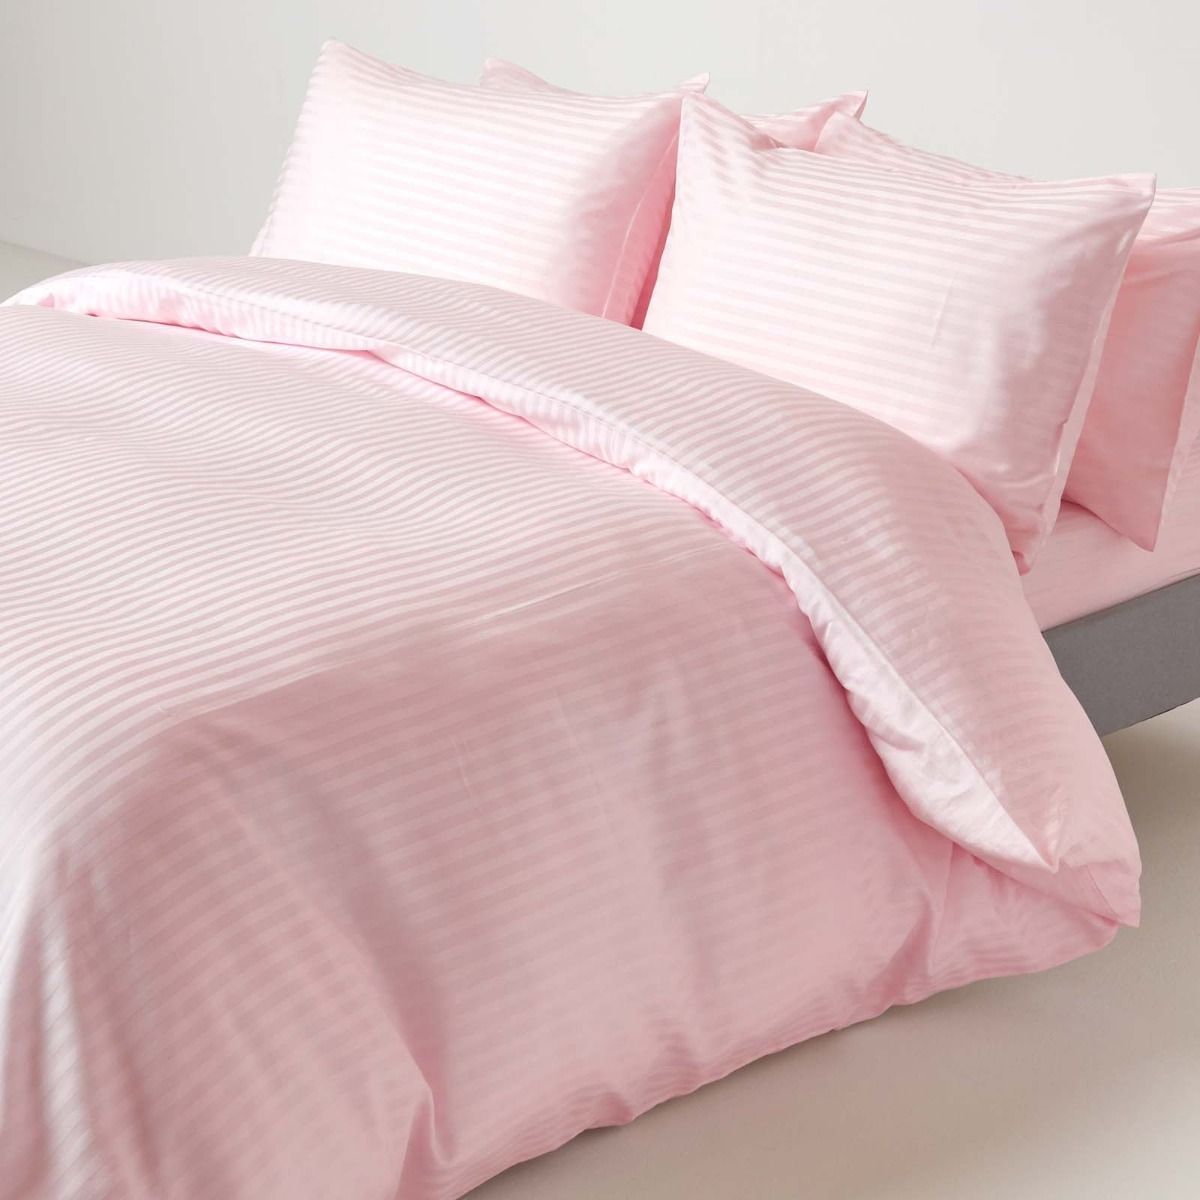 Extra PKT Details about   Only Fitted Sheet US Size Egyptian Cotton 1000 TC Pink Stripe 